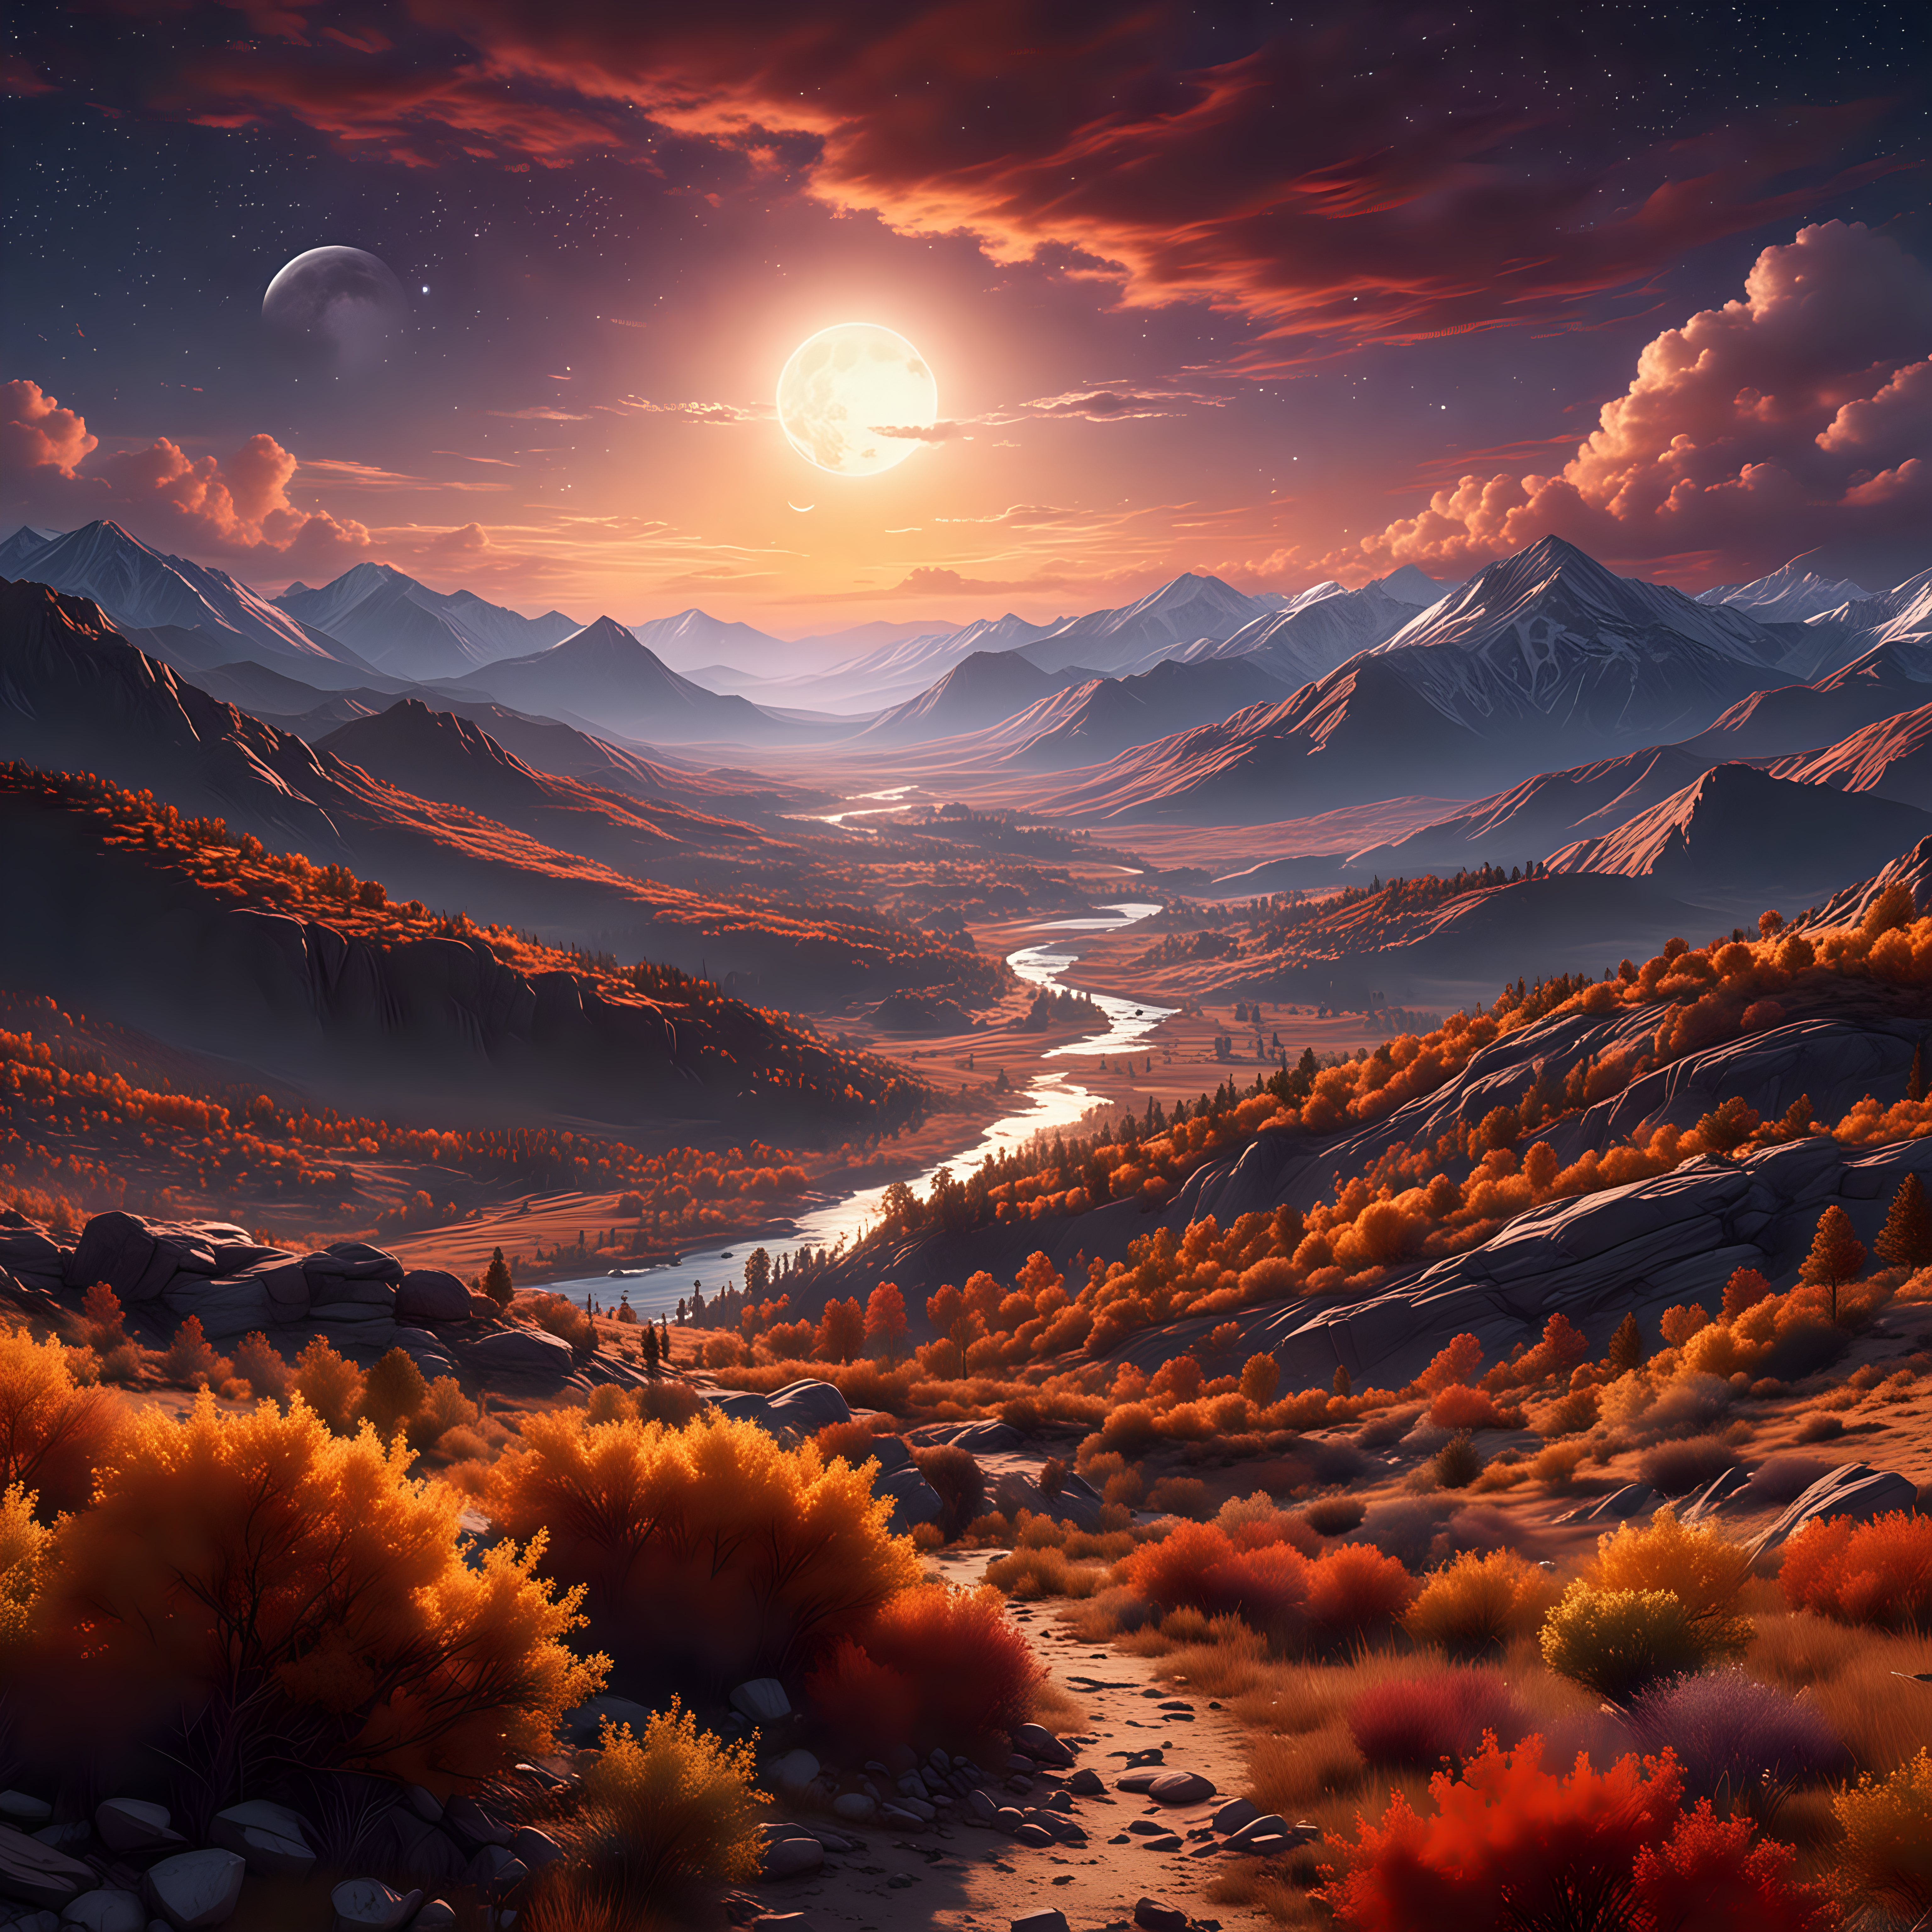 Dramatic Sunset Mountain View with Galactic Sky and Saturated Colors